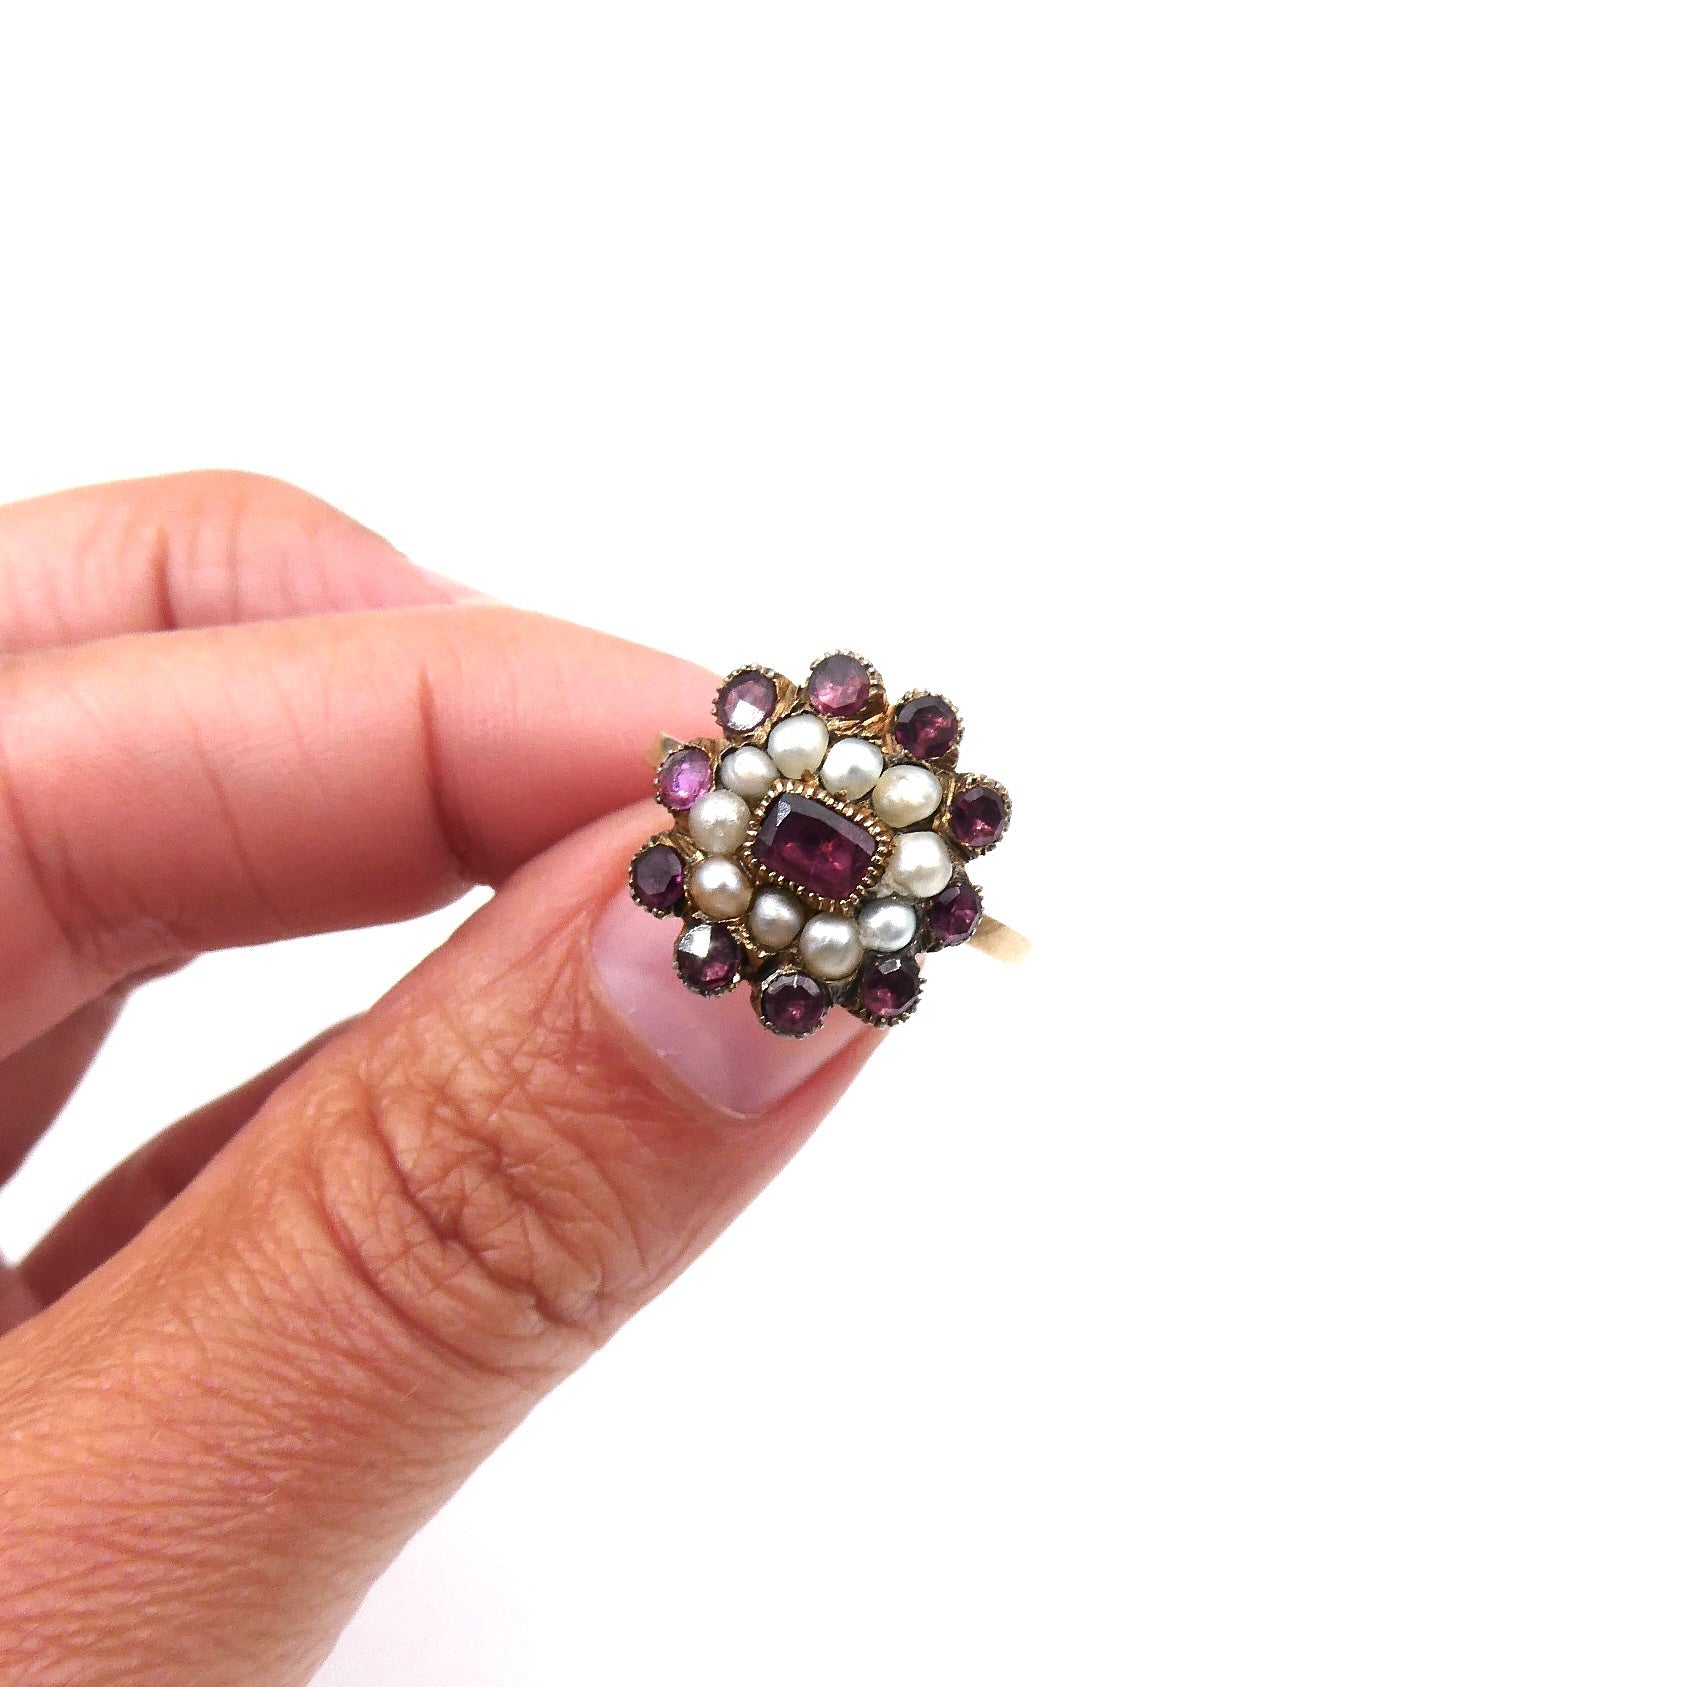 Antique garnet and pearl ring, unique ring converted from a Georgian brooch. - Collected